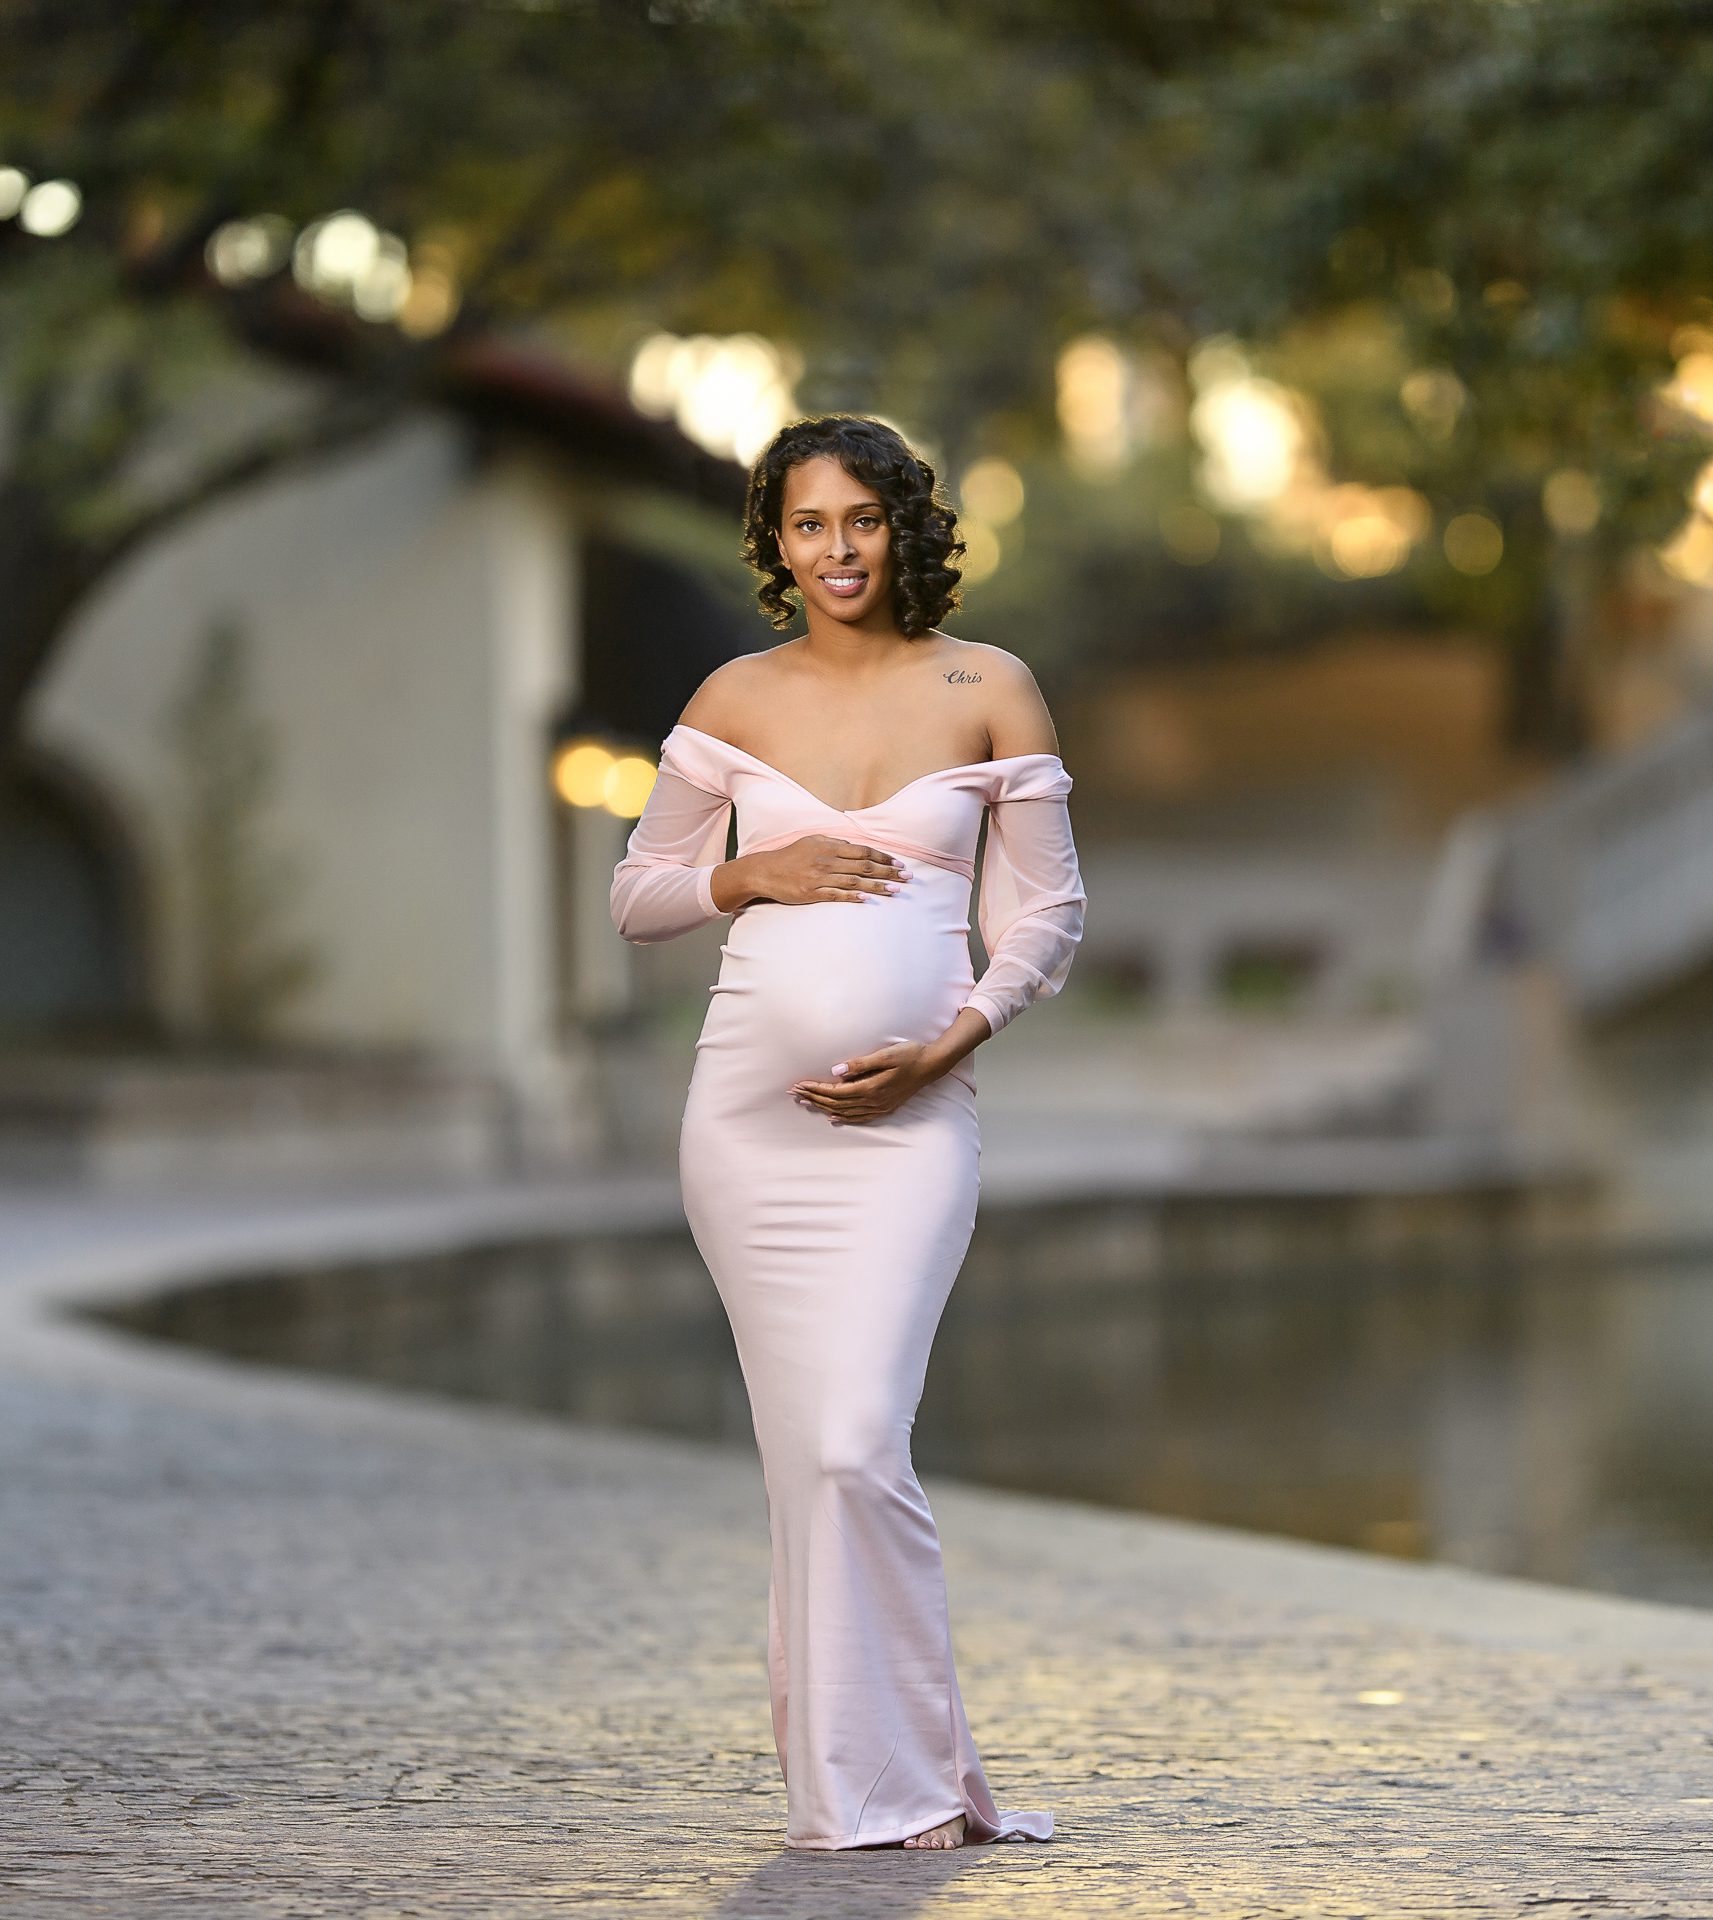 A woman posing for maternity photography - Natalie Roberson Photography